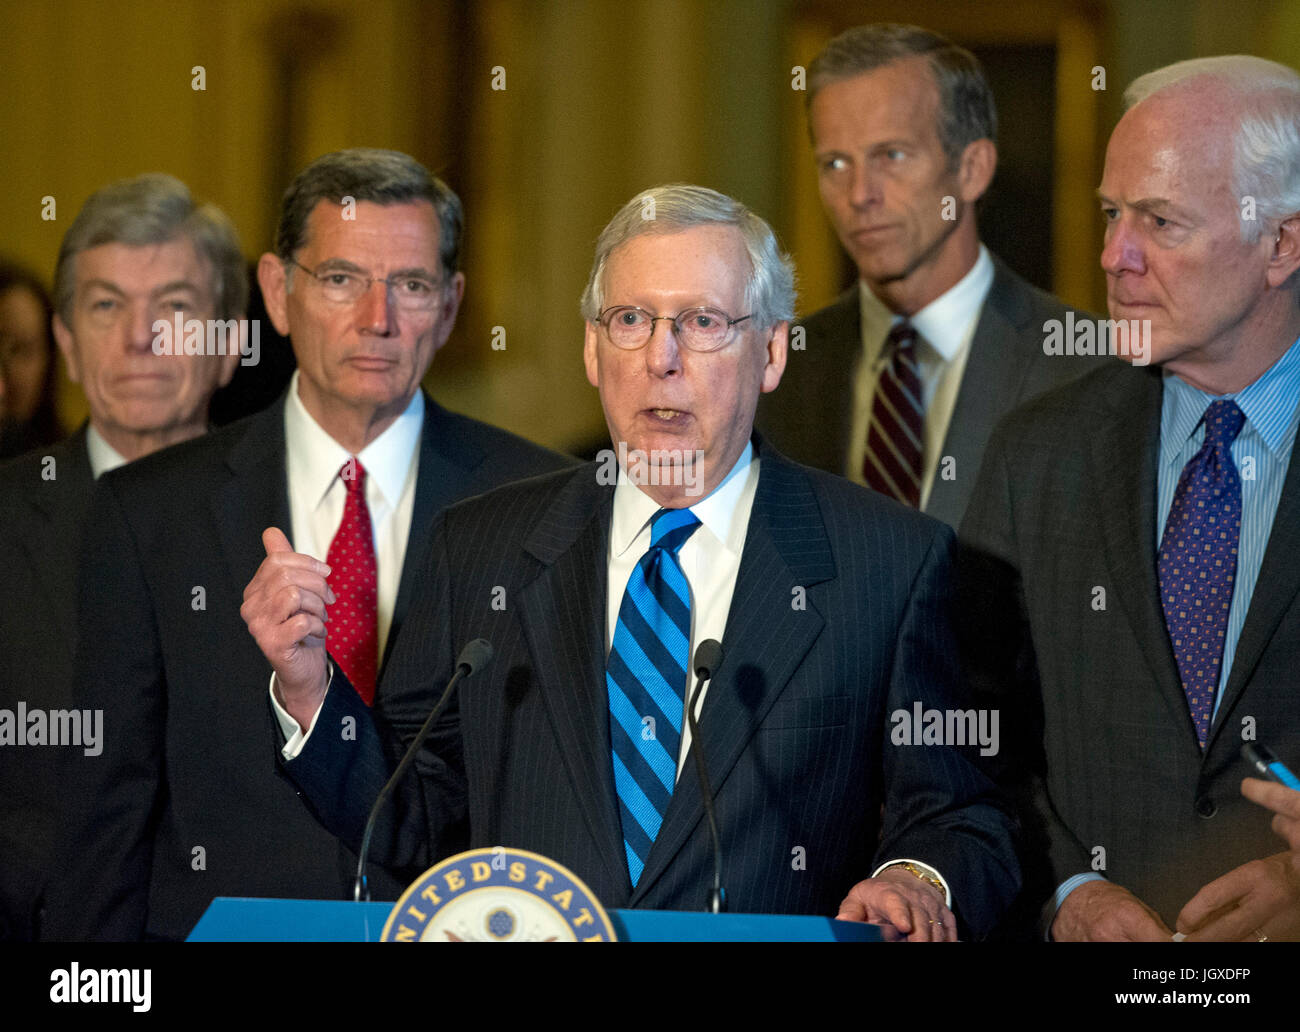 United States Senate Majority Leader Mitch McConnell (Republican of Kentucky), center, speaks to reporters following the Republican Party luncheon in the United States Capitol in Washington, DC on Tuesday, July 11, 2017. From left to right: US Senator Roy Blunt (Republican of Missouri), US Senator John Barrasso (Republican of Wyoming), Leader McConnell, US Senator John Thune (Republican of South Dakota) and US Senator John Cornyn (Republican of Texas). In his remarks, McConnell announced he will keep the Senate in session for the first two weeks of August, delaying their summer recess. Credit: Stock Photo